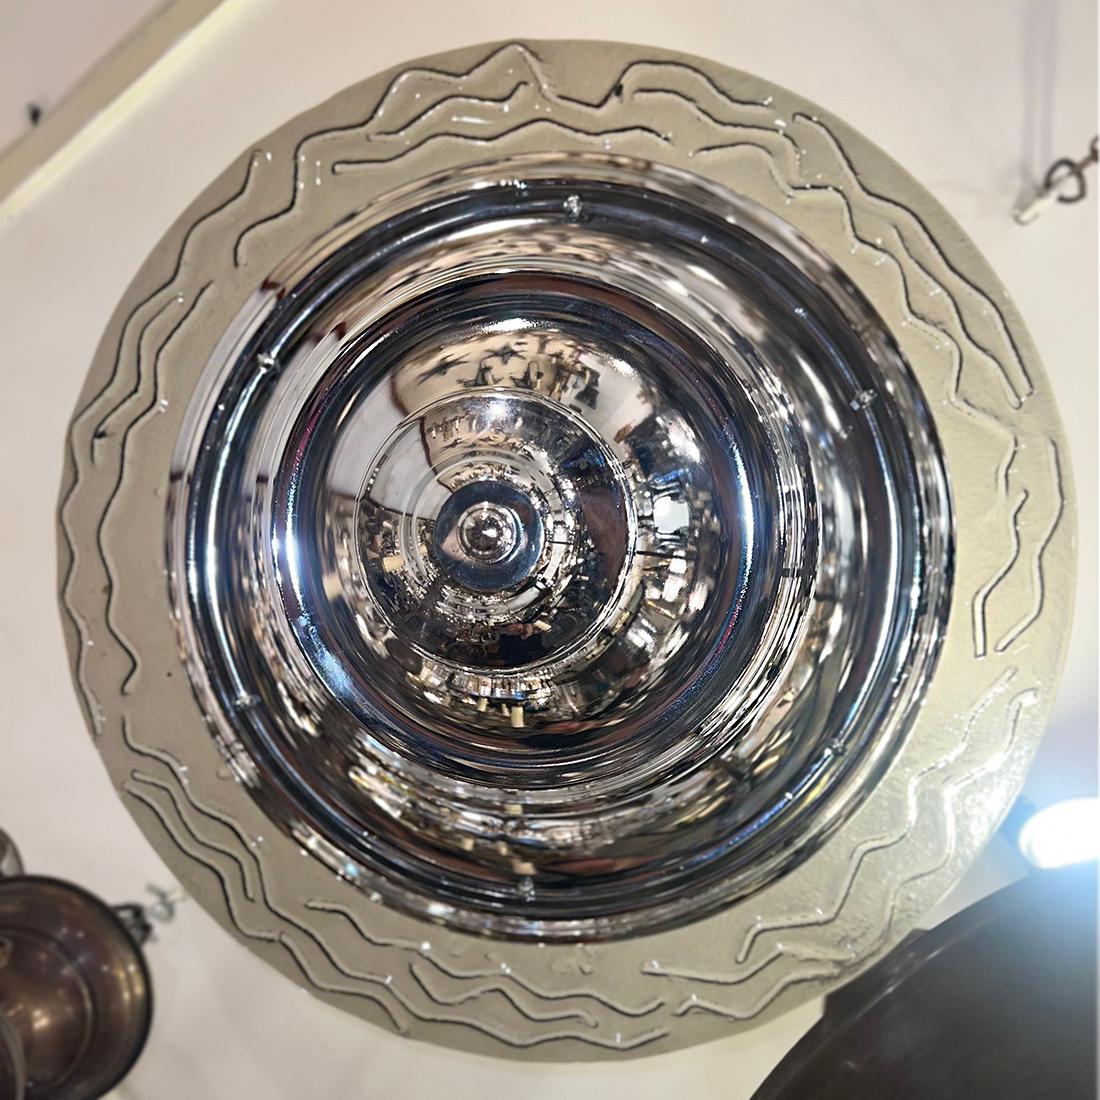 Nickel-Plated Moderne Light Fixture In Good Condition For Sale In New York, NY